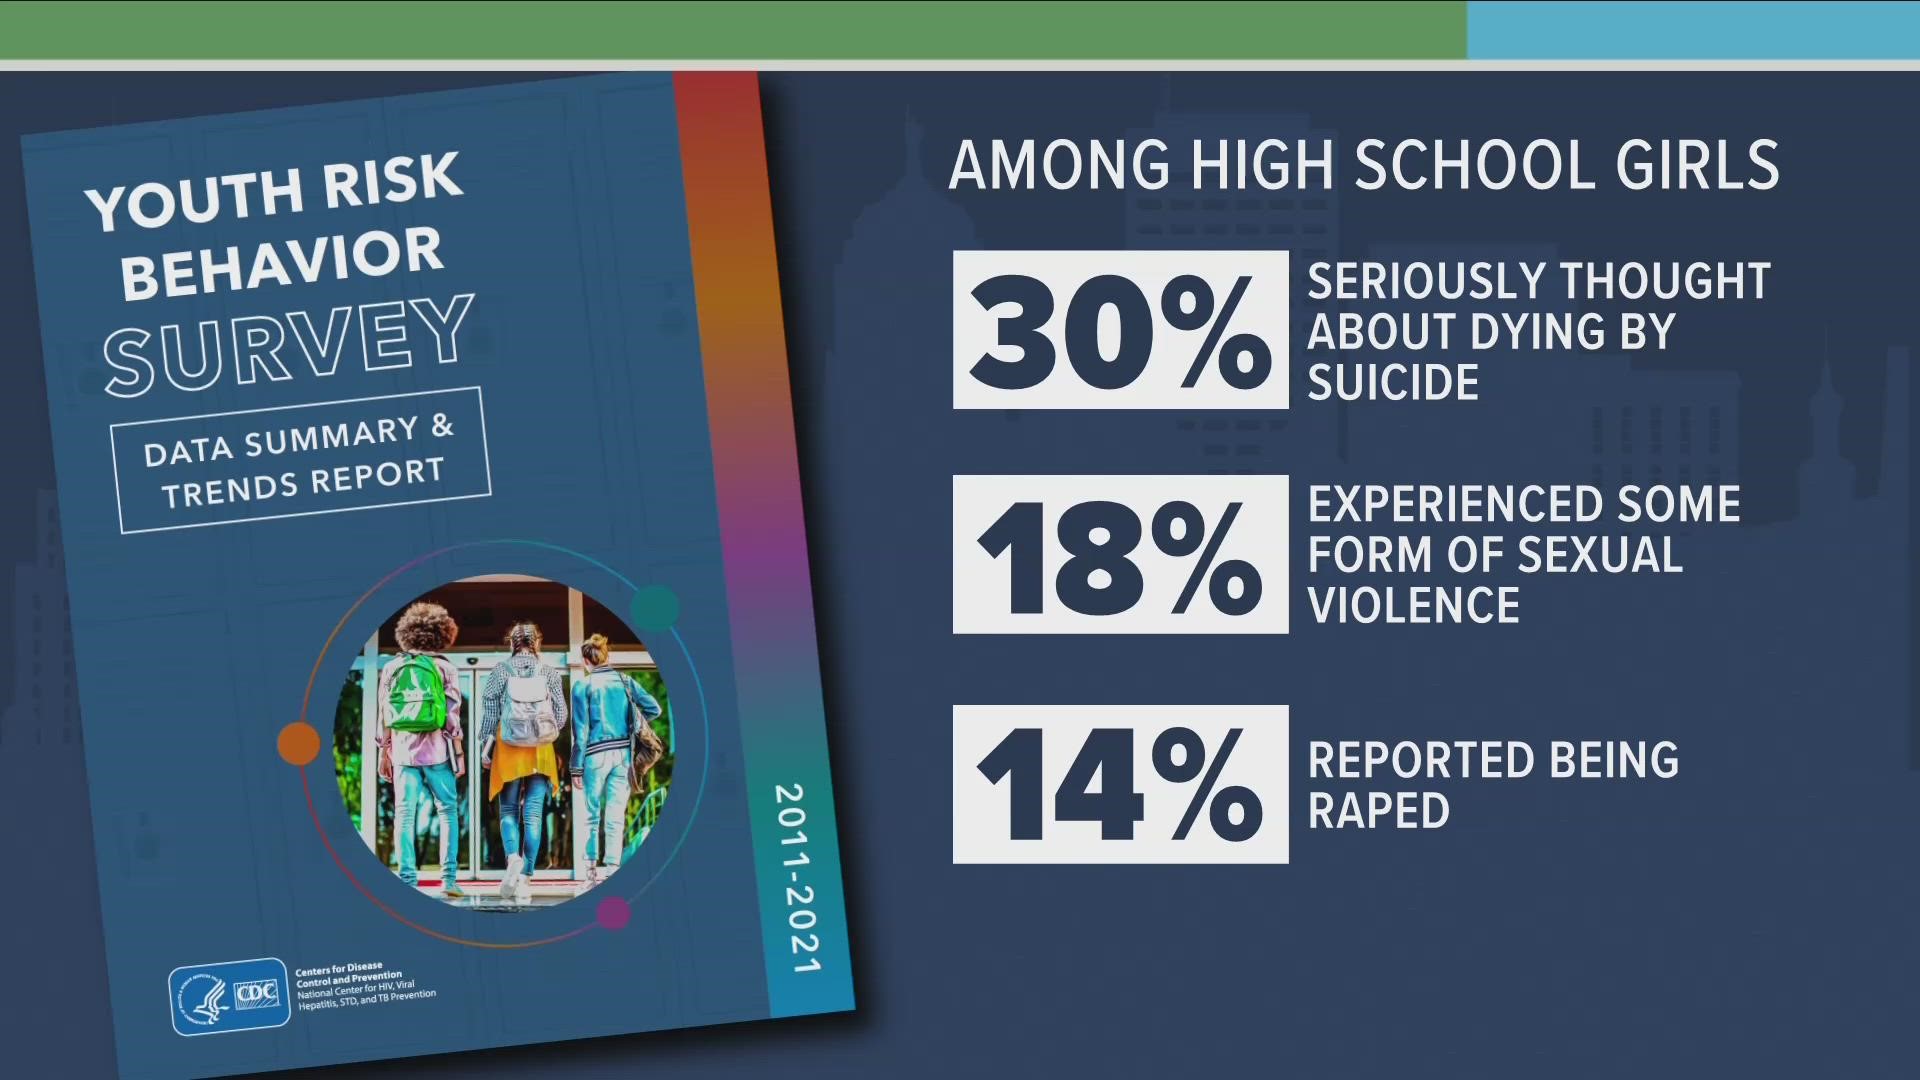 30 PERCENT OF HIGH SCHOOL GIRLS SAID THEY'D SERIOUSLY THOUGHT OF DYING BY SUICIDE - THAT'S UP BY NEARLY 60 PERCENT FROM A DECADE AGO.